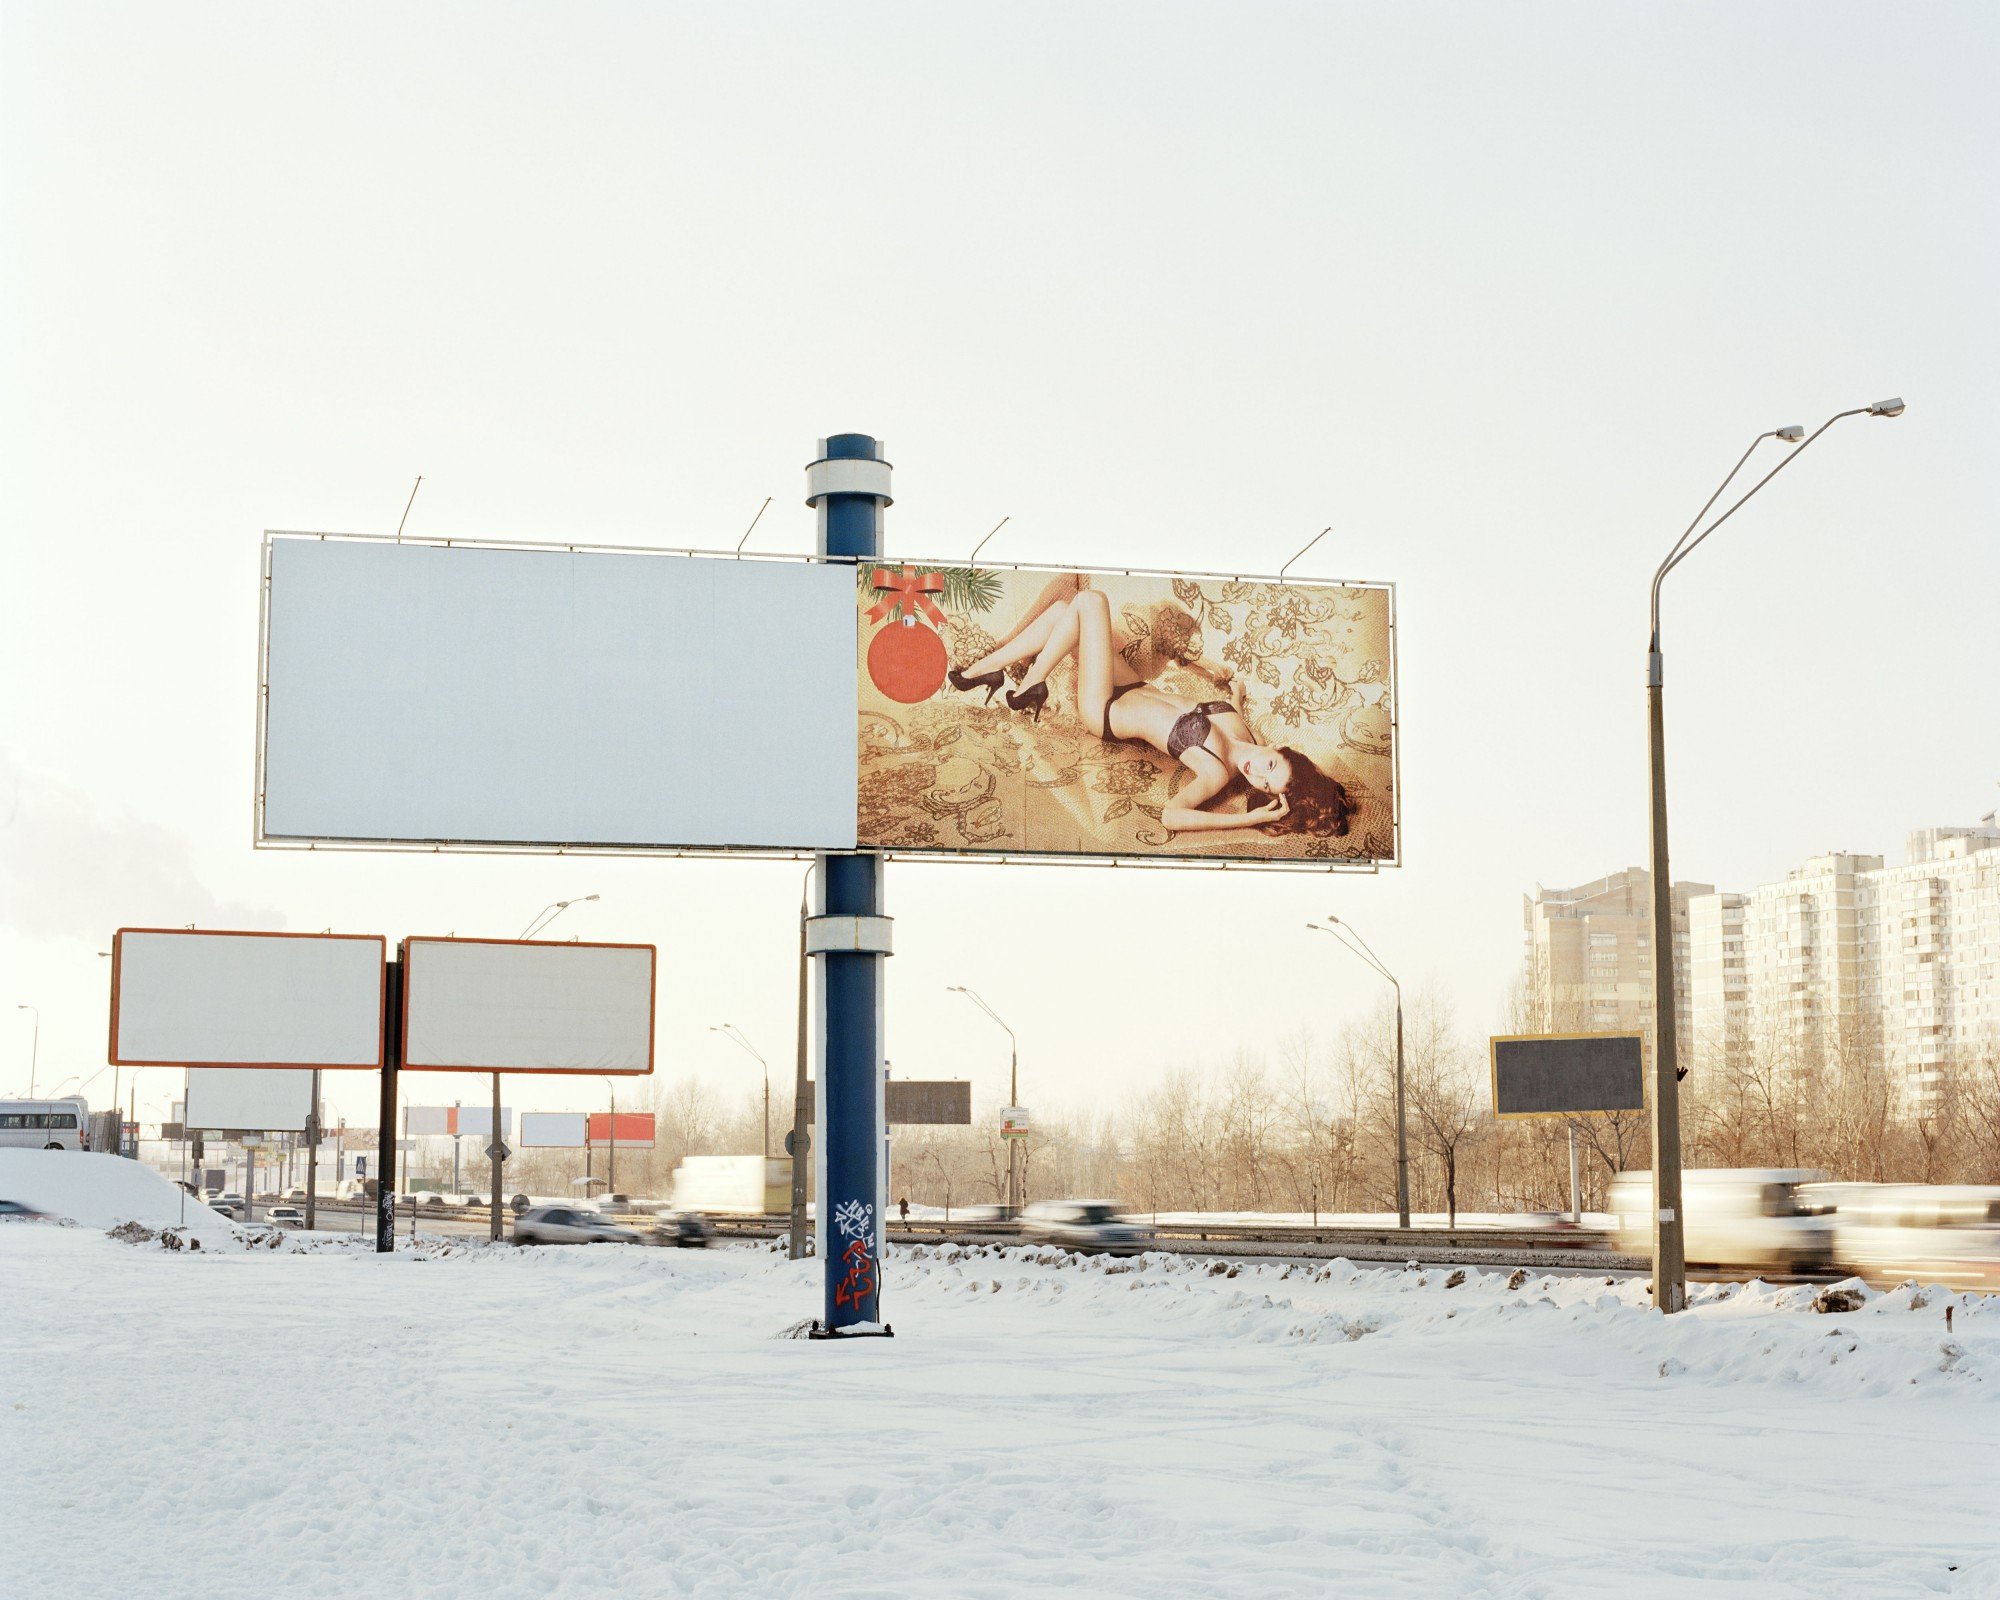 Advertisement. From <em>Ekaterina</em> (2012) by Romain Mader